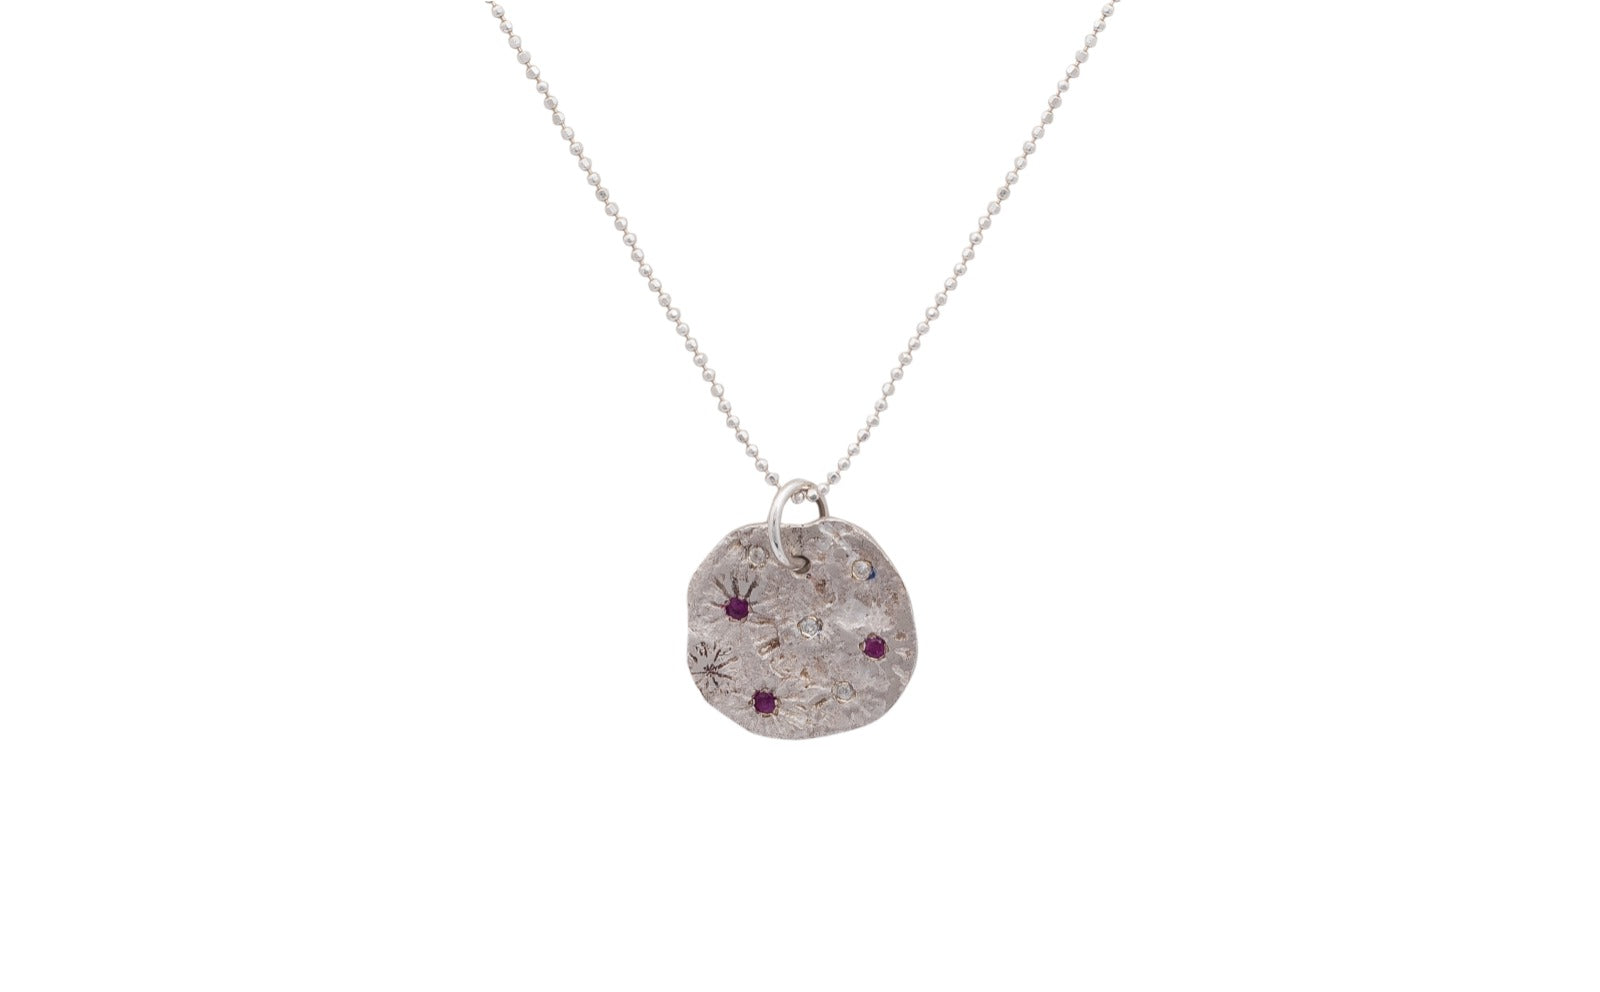 The Charm Silver necklace with Rubies and Diamonds